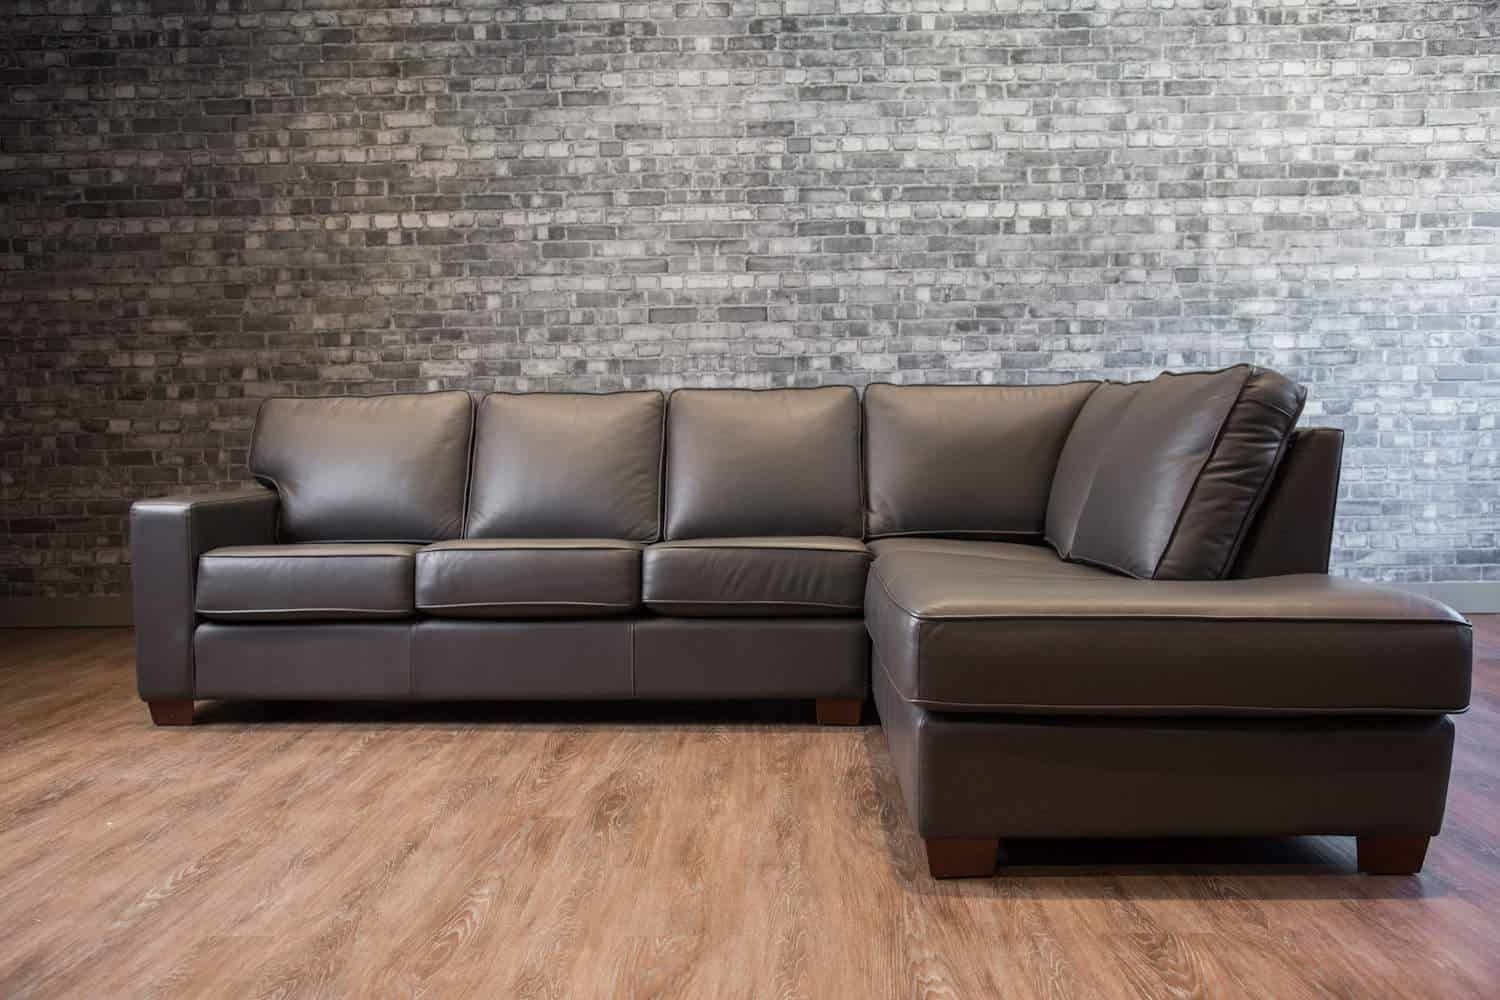 The Mesa Leather Sectional | Canada's Boss Leather Sofas And Furniture Intended For Mesa Foam 2 Piece Sectionals (View 21 of 30)